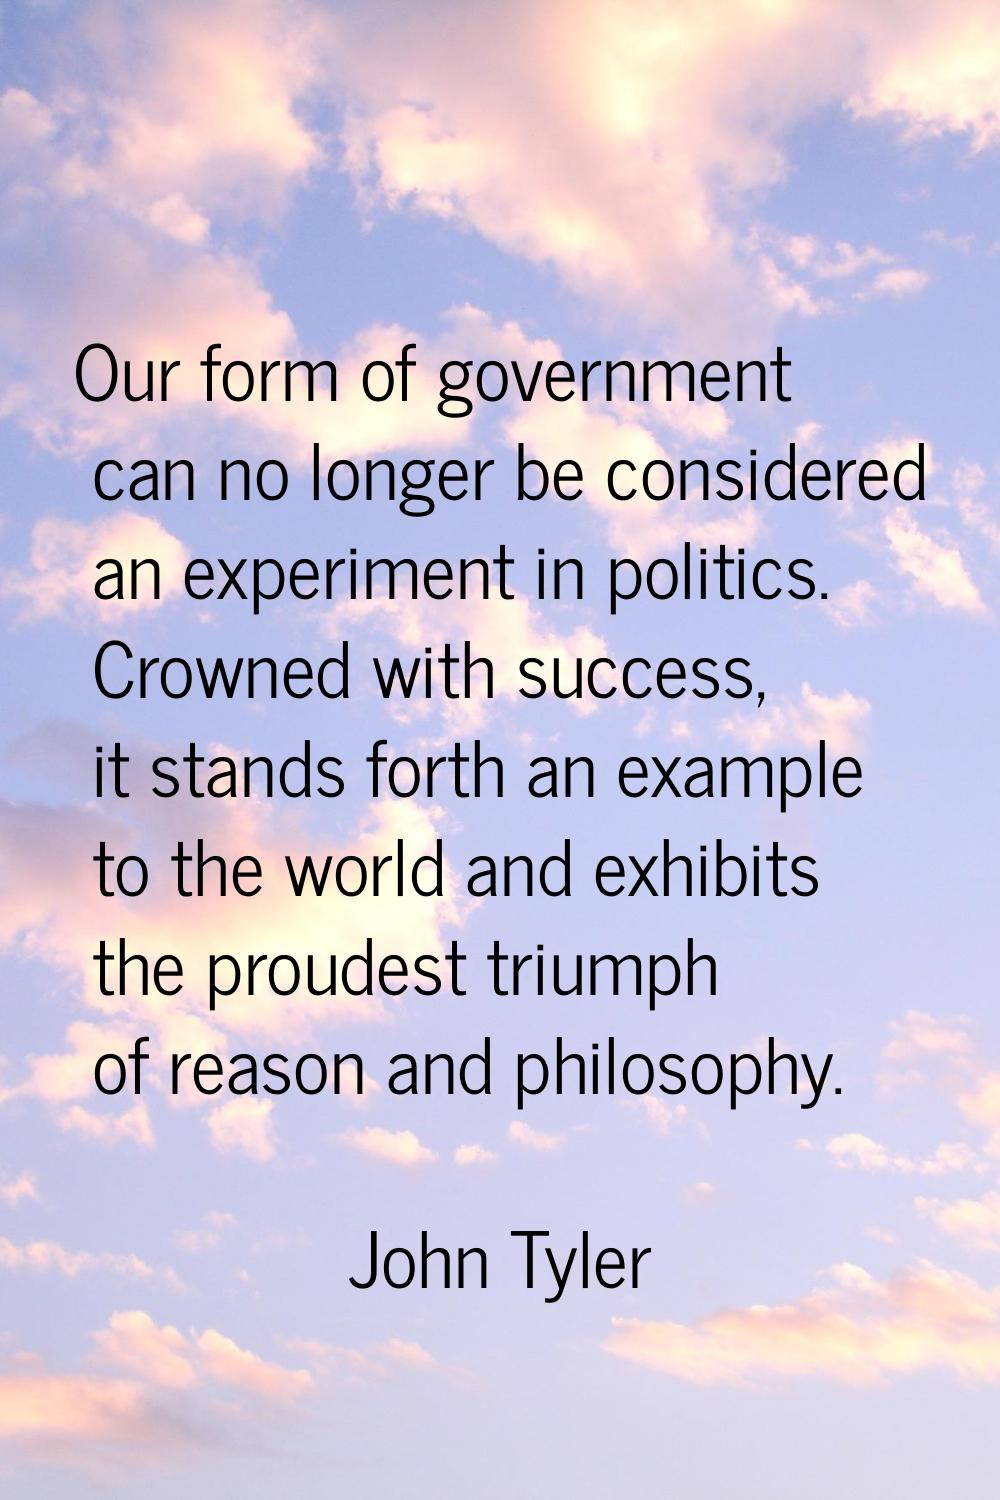 Our form of government can no longer be considered an experiment in politics. Crowned with success,